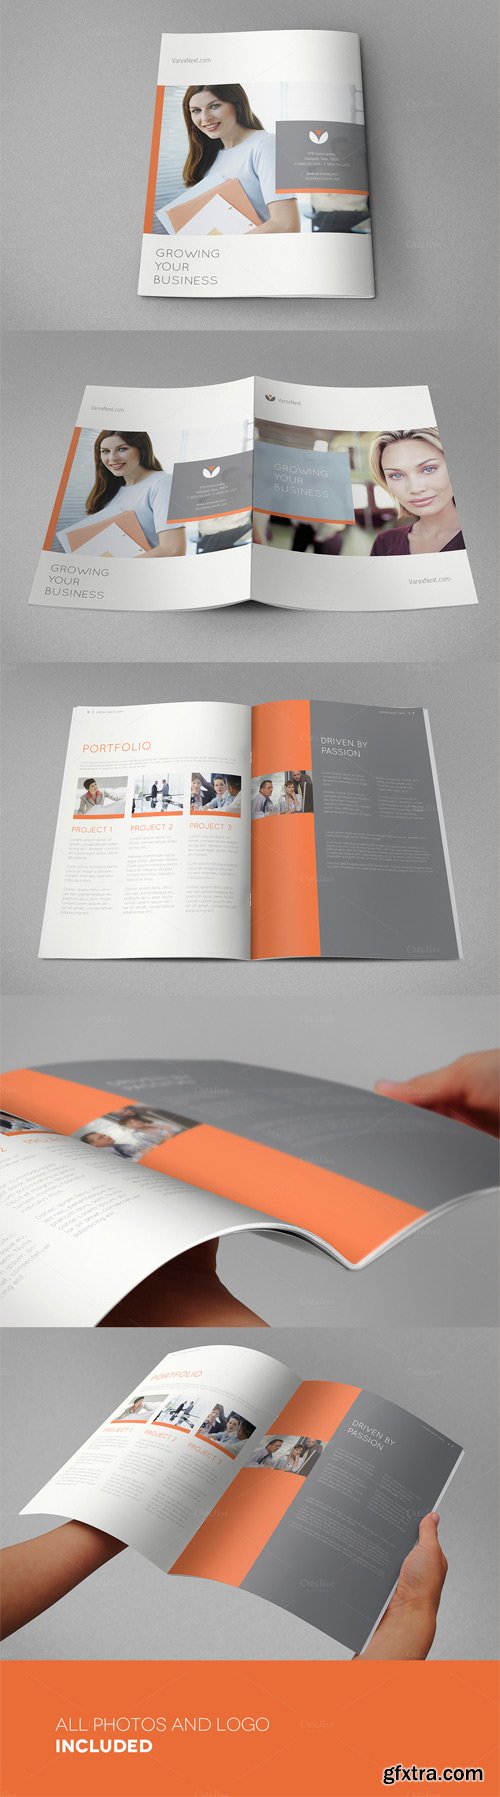 CM 301321 - Corporate Business Brochure 16 Pages